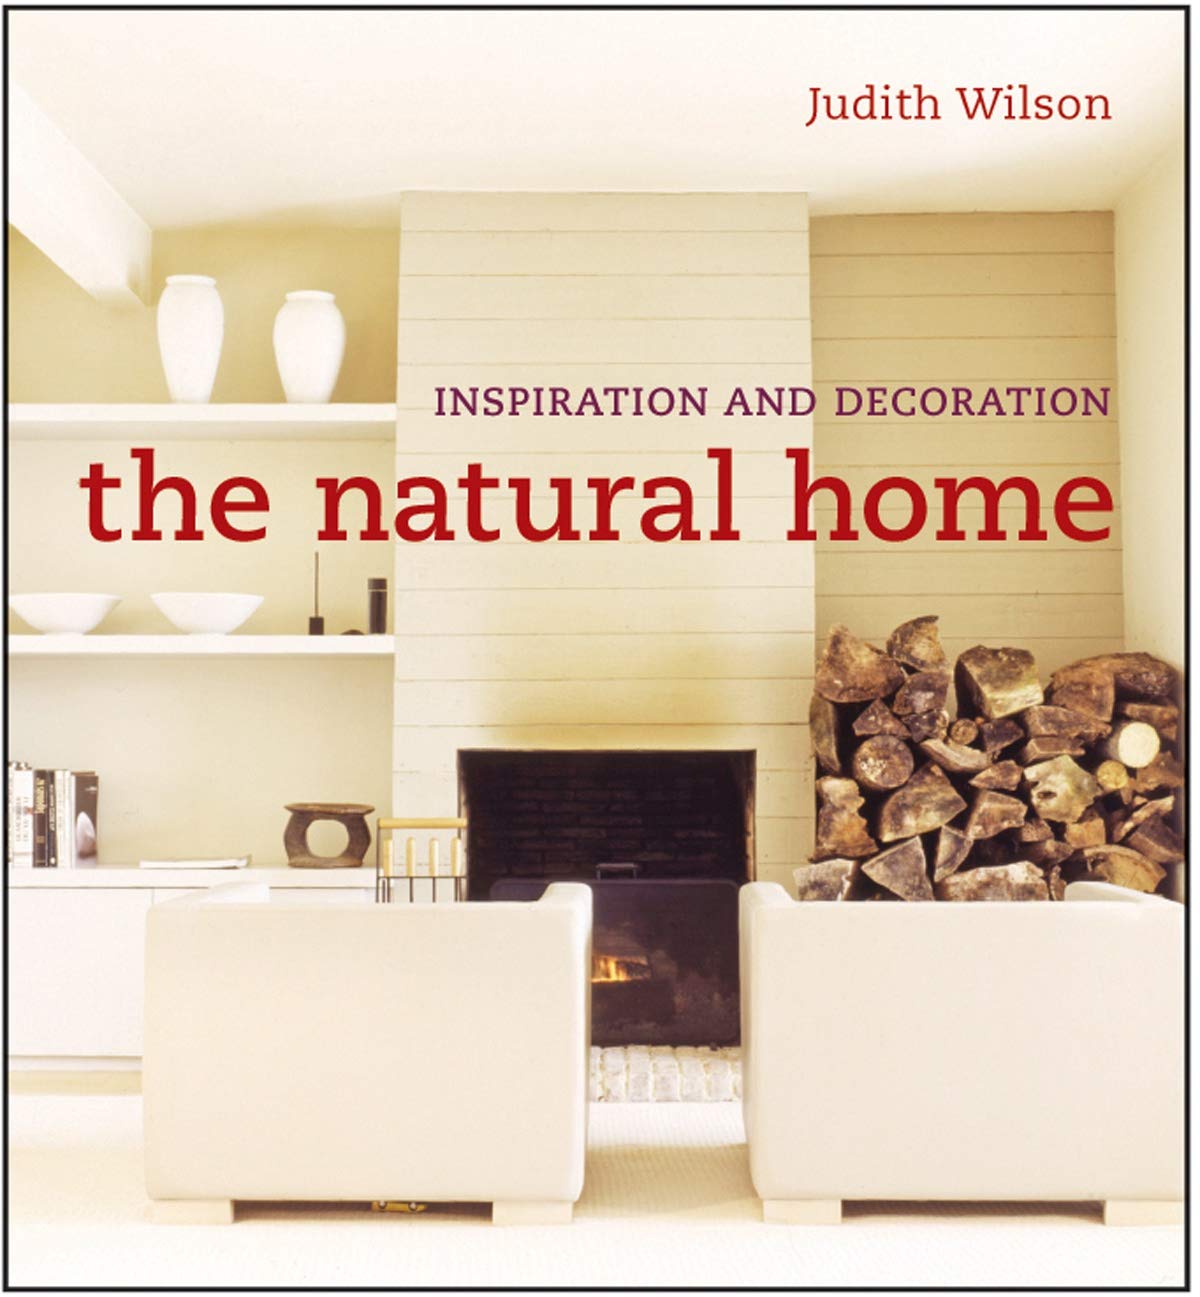 The Natural Home: Inspiration and Decoration - Judith Wilson